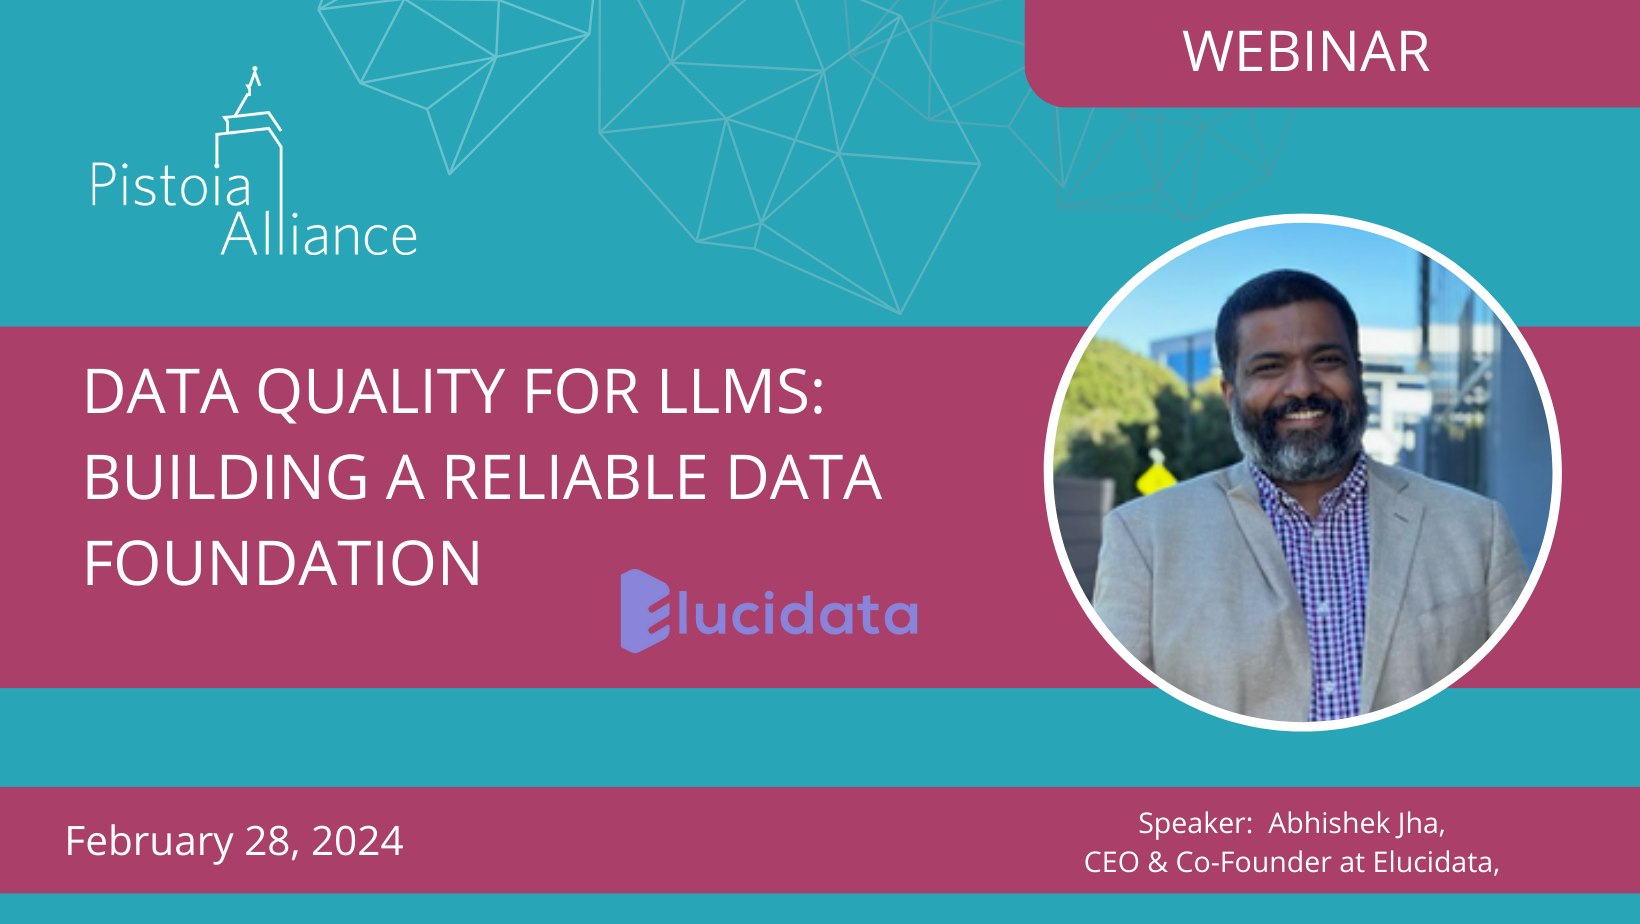 Data Quality for LLMs: Building a Reliable Data Foundation